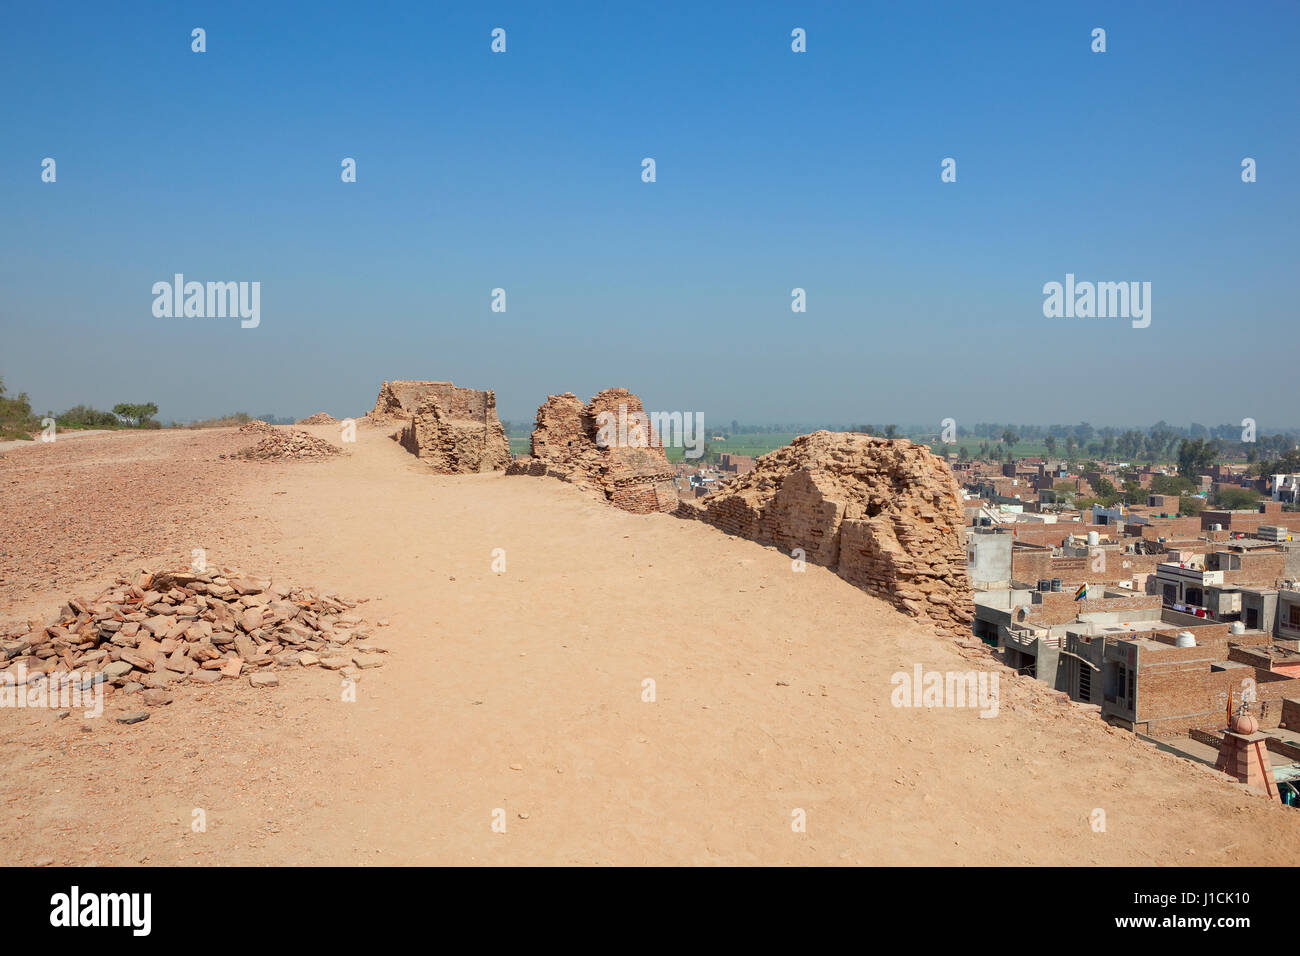 restoration work at the historical site of bhatner fort hanumangarh rajasthan india overlooking the town and countryside under a clear blue sky Stock Photo